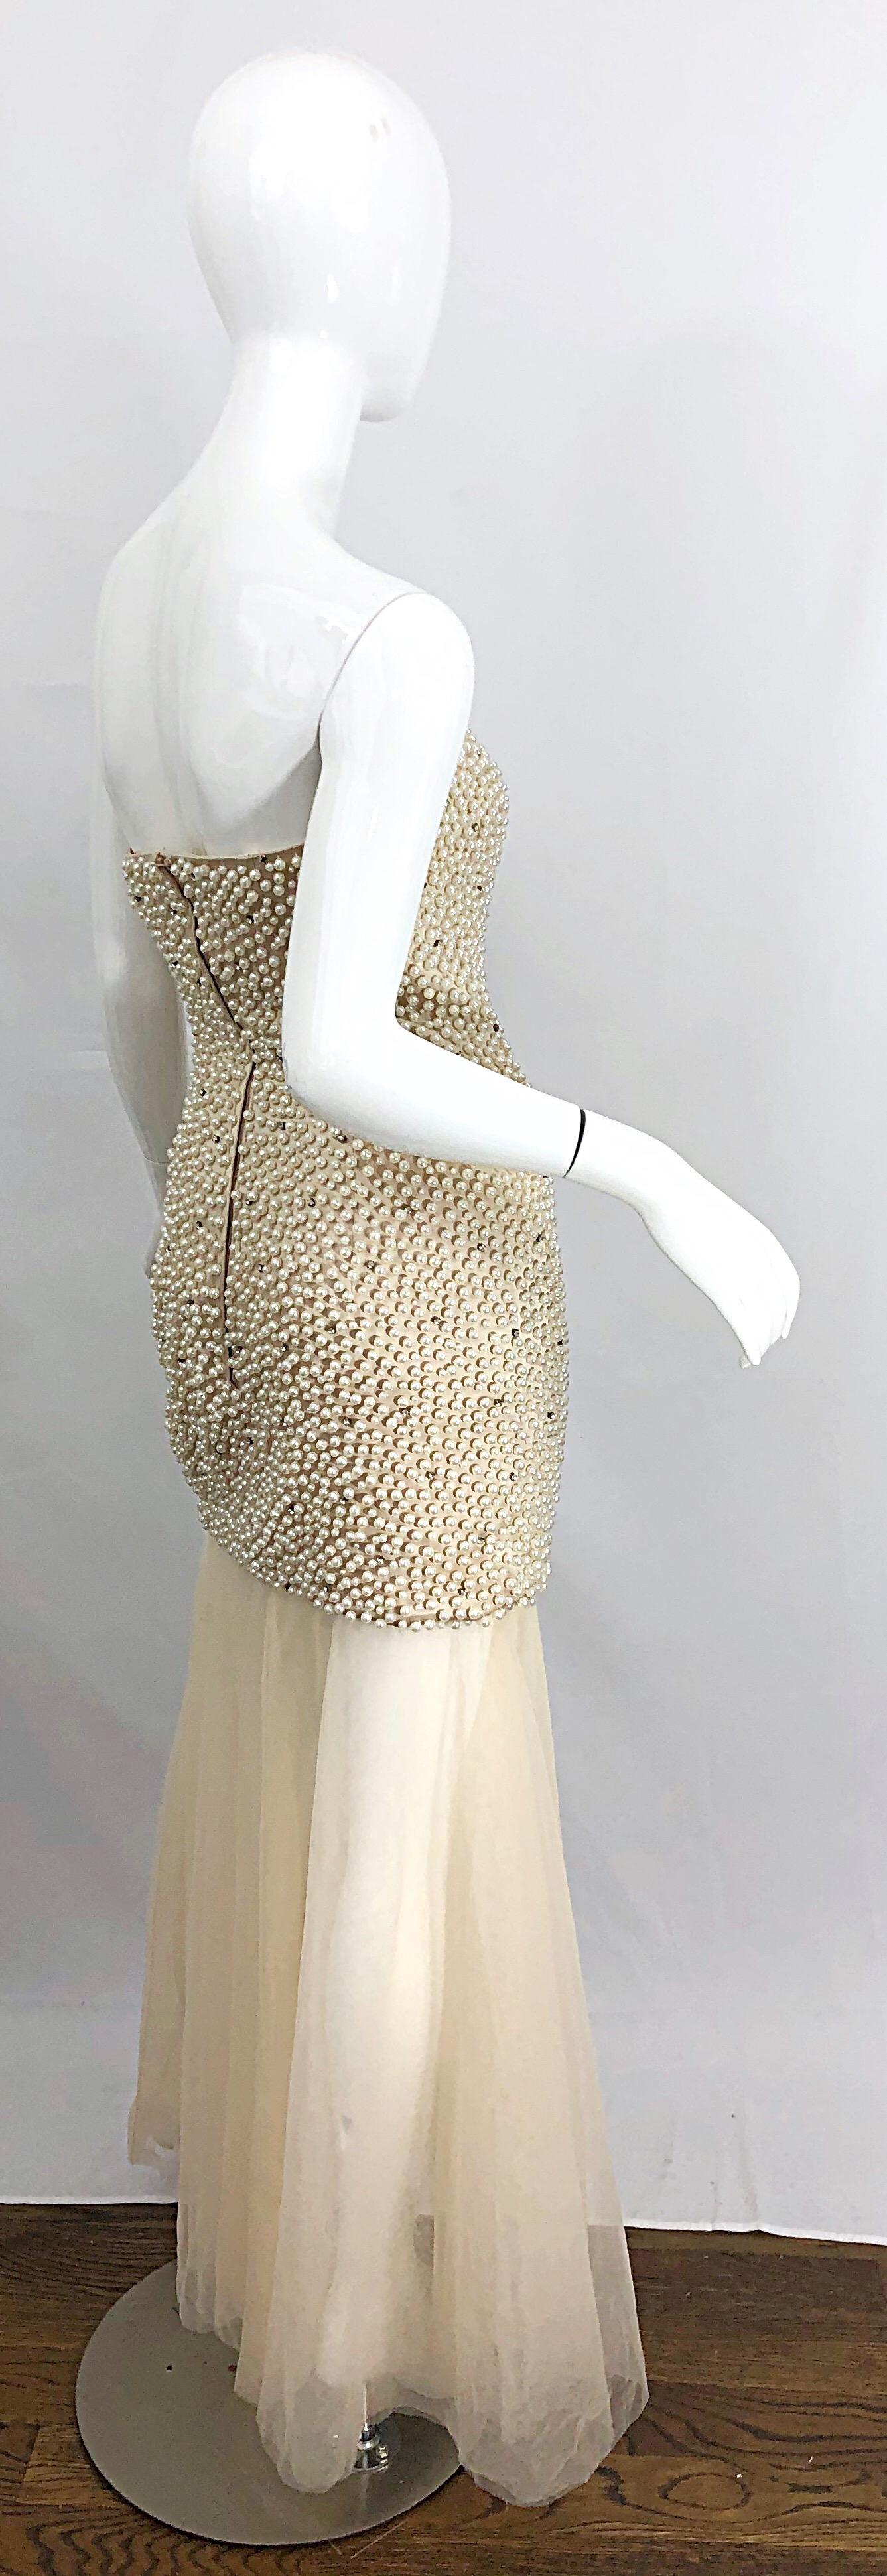 Phenomenal 1980s Couture Pearl + Rhinestone Encrusted Strapless Beige 80s Gown 7